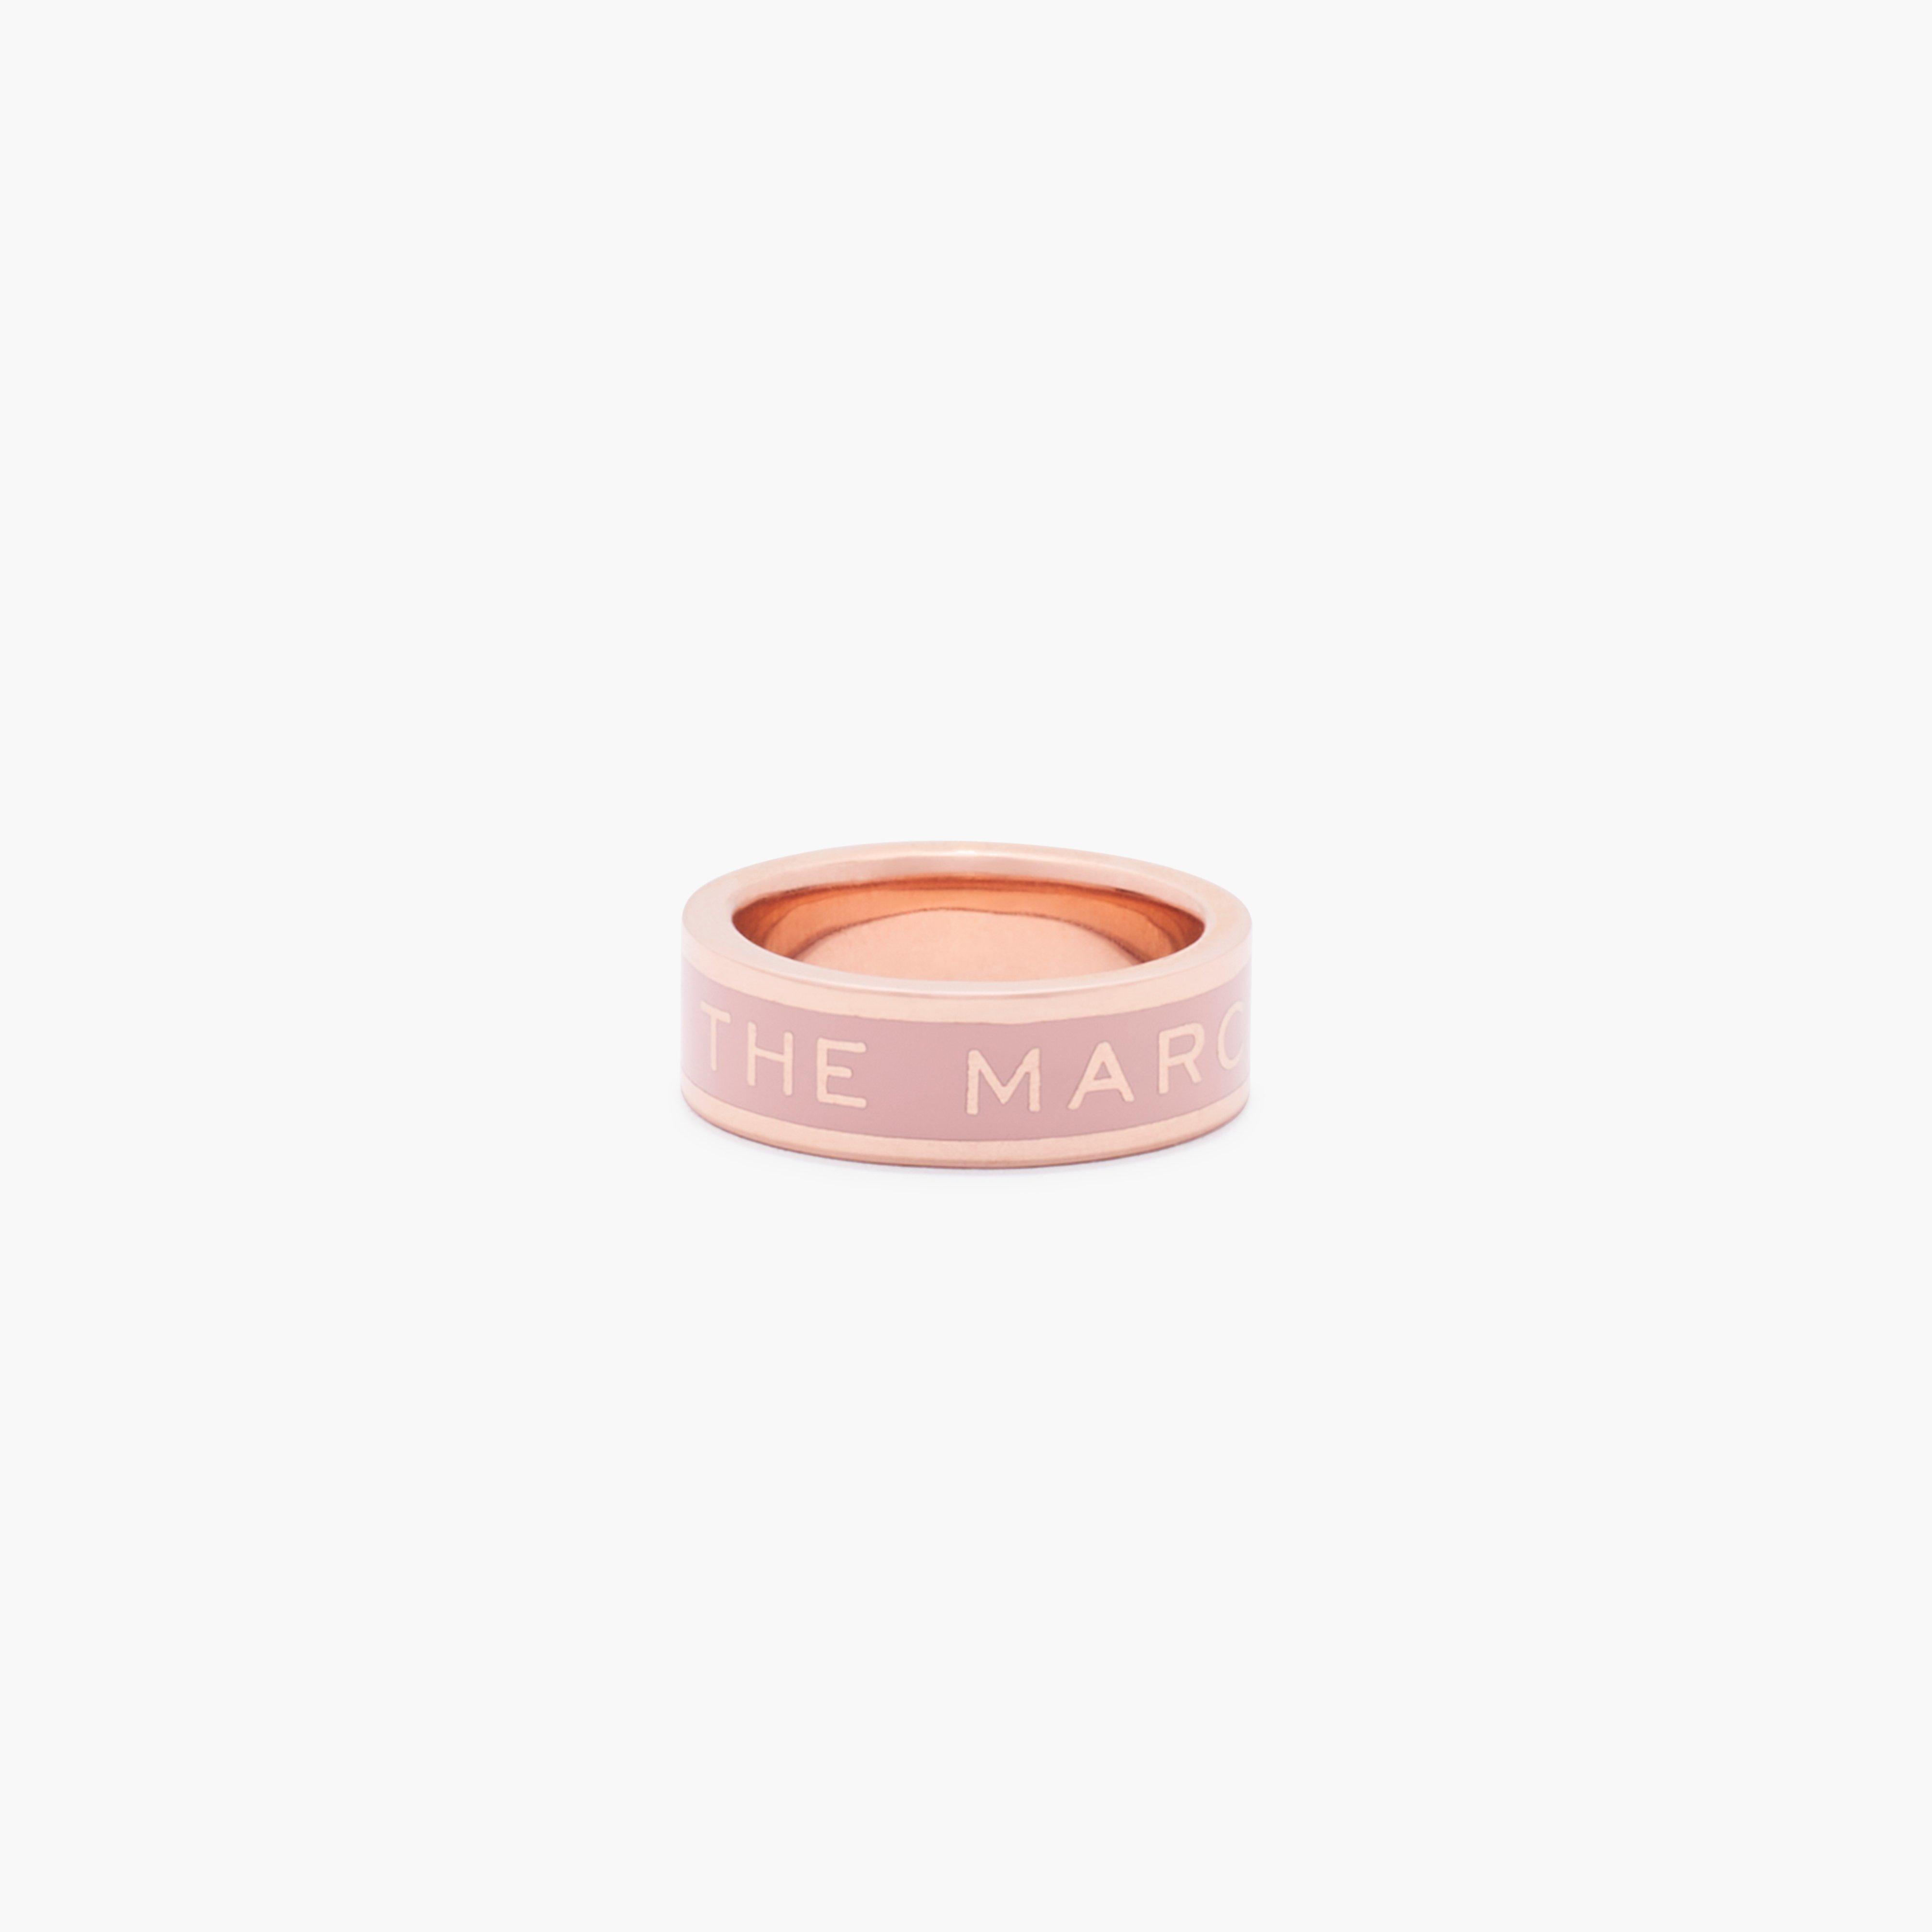 Marc by Marc jacobs The Medallion Ring,SAND/ROSE GOLD